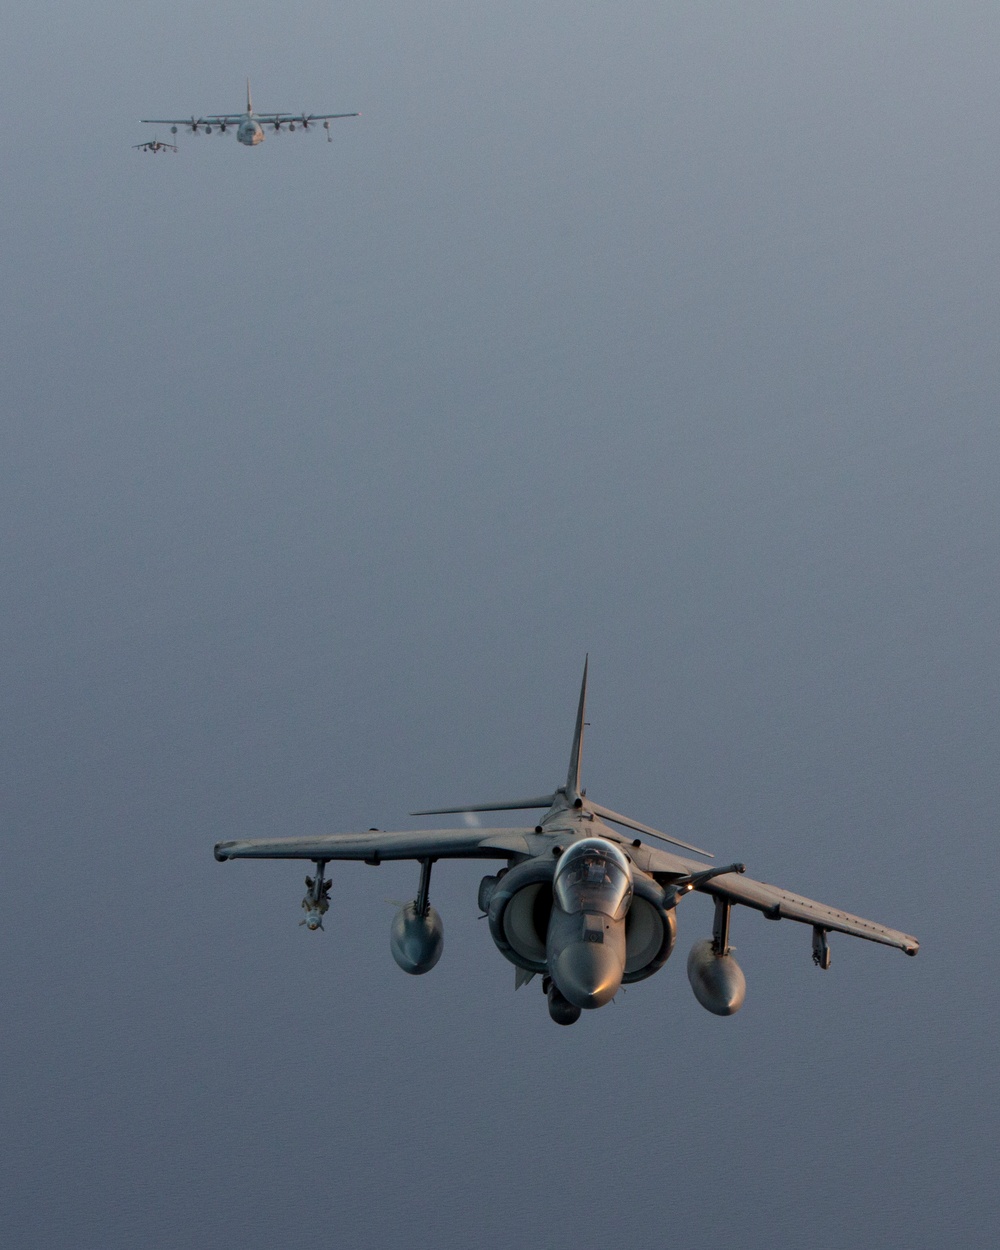 SP-MAGTF Crisis Response KC-130s and Ospreys Conduct Refueling Rehearsals with 22nd Marine Expeditionary Unit’s Harriers